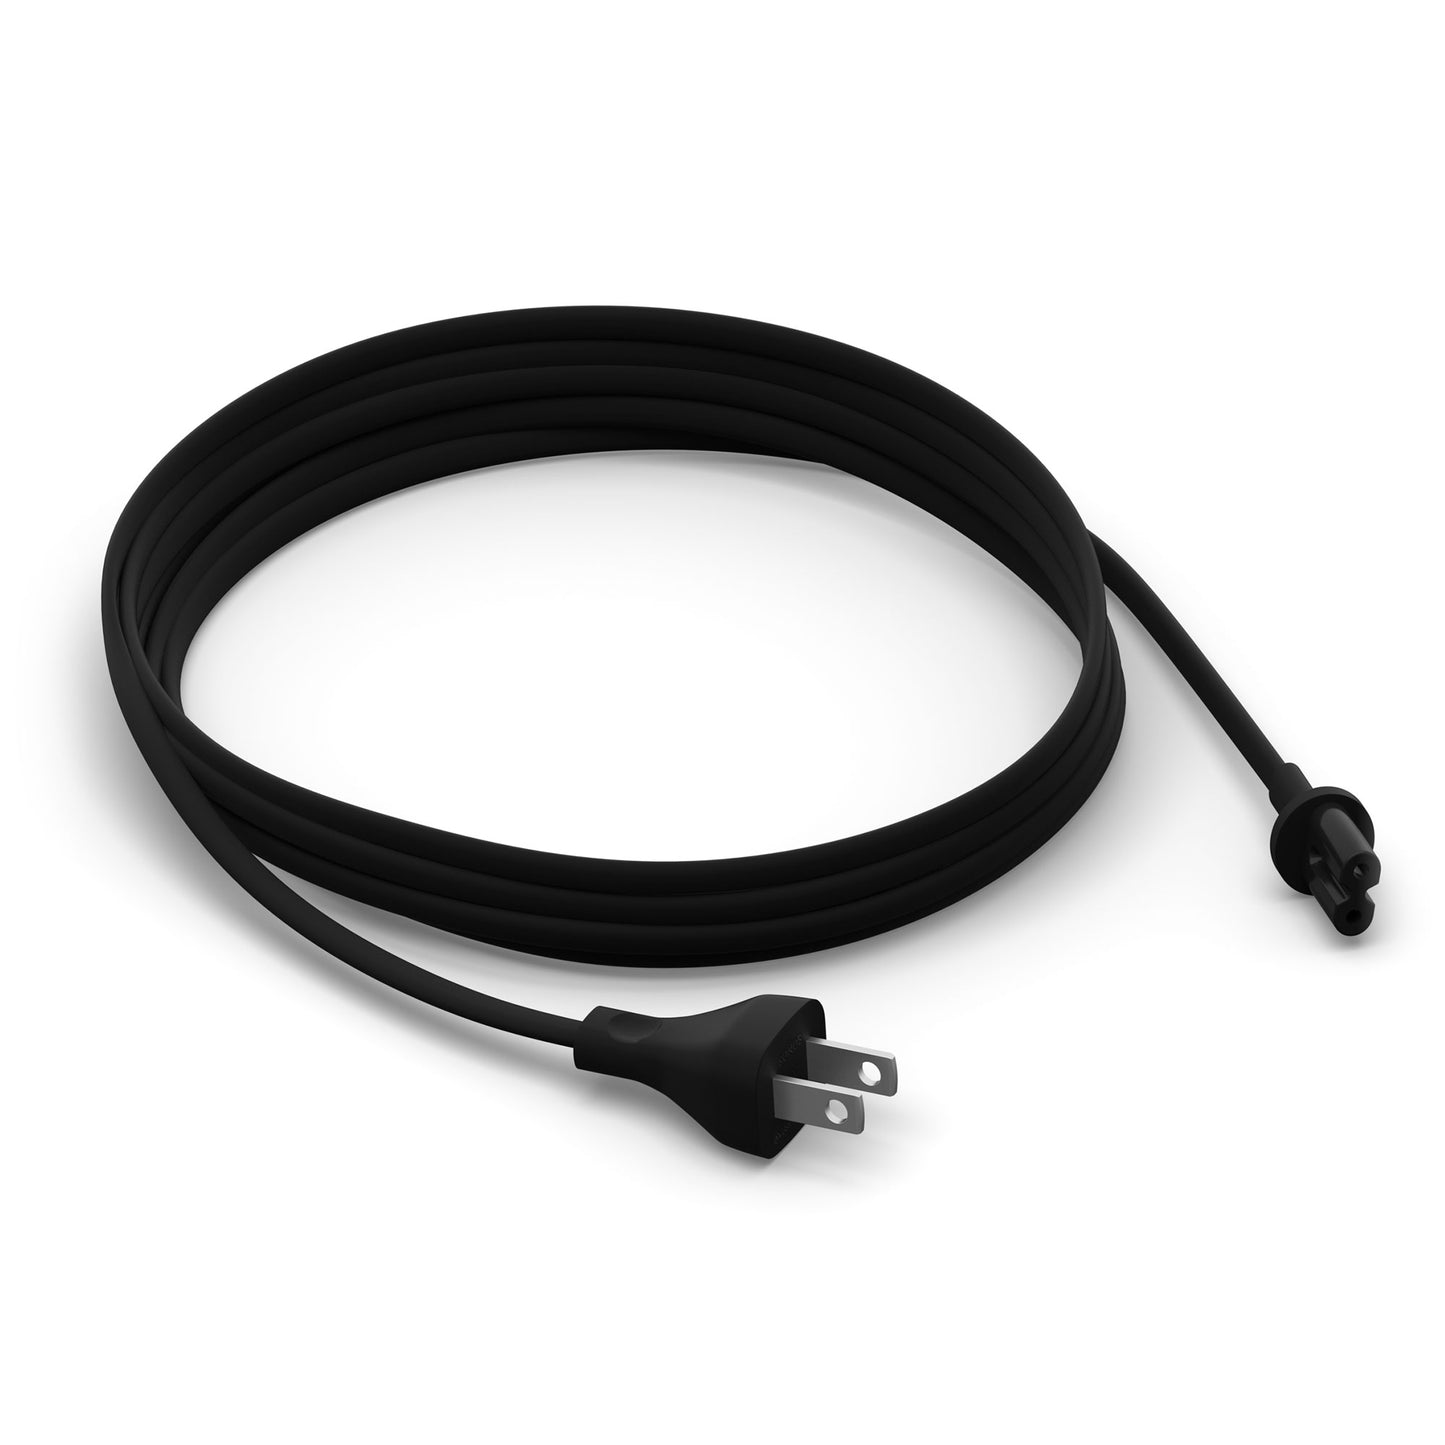 Sonos Power Cable 11.5ft (Black) - Top View